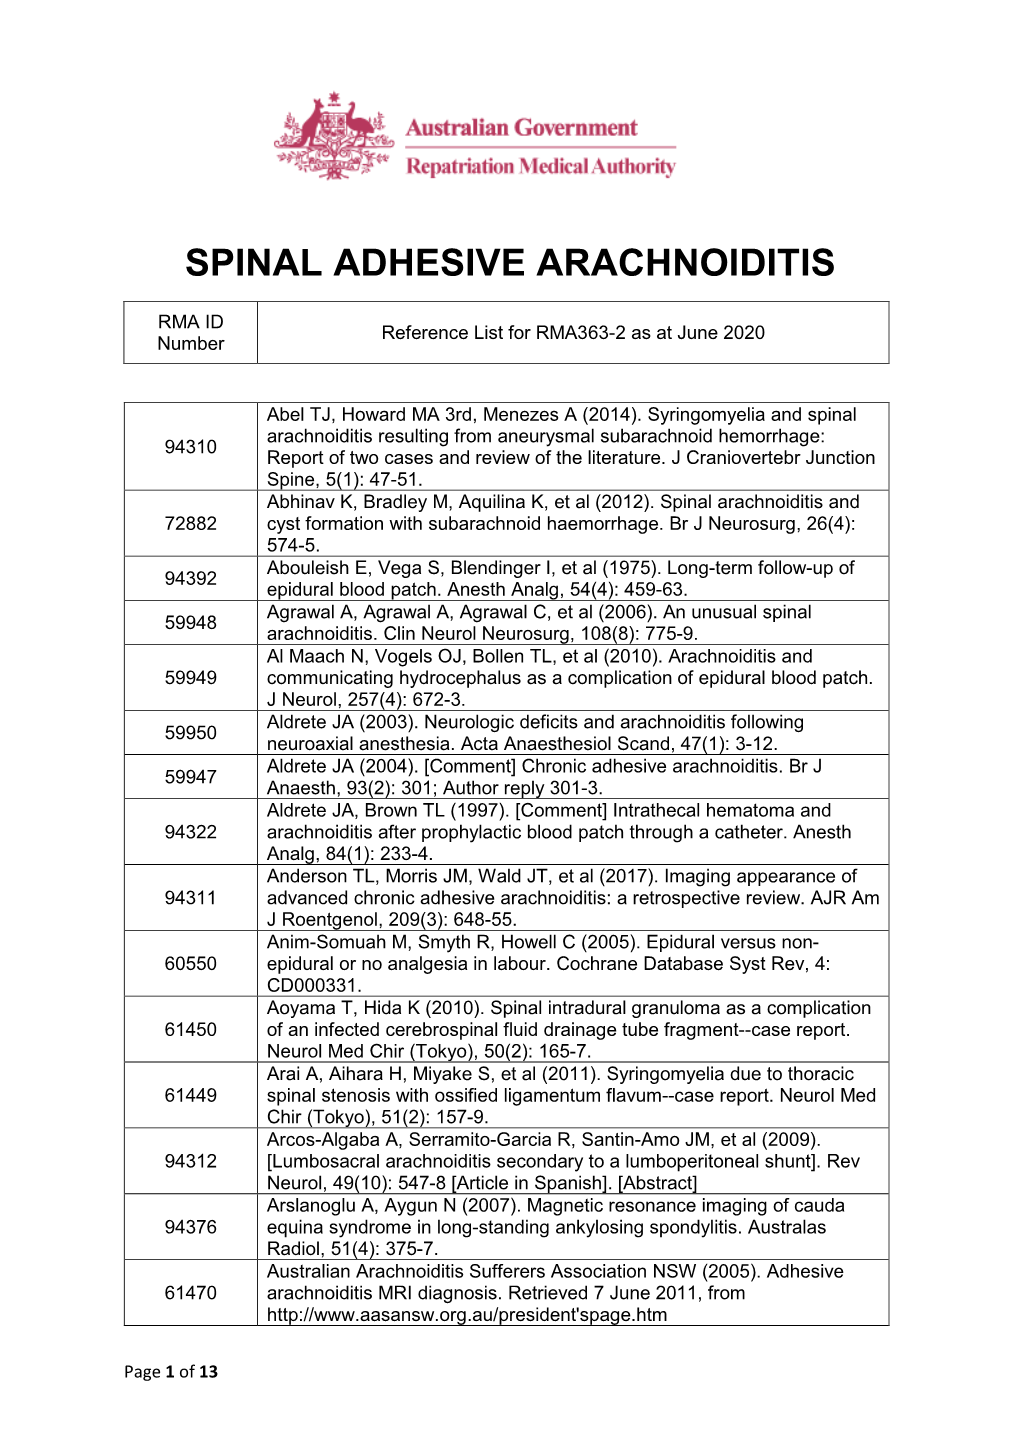 Reference List Concerning Spinal Adhesive Arachnoiditis